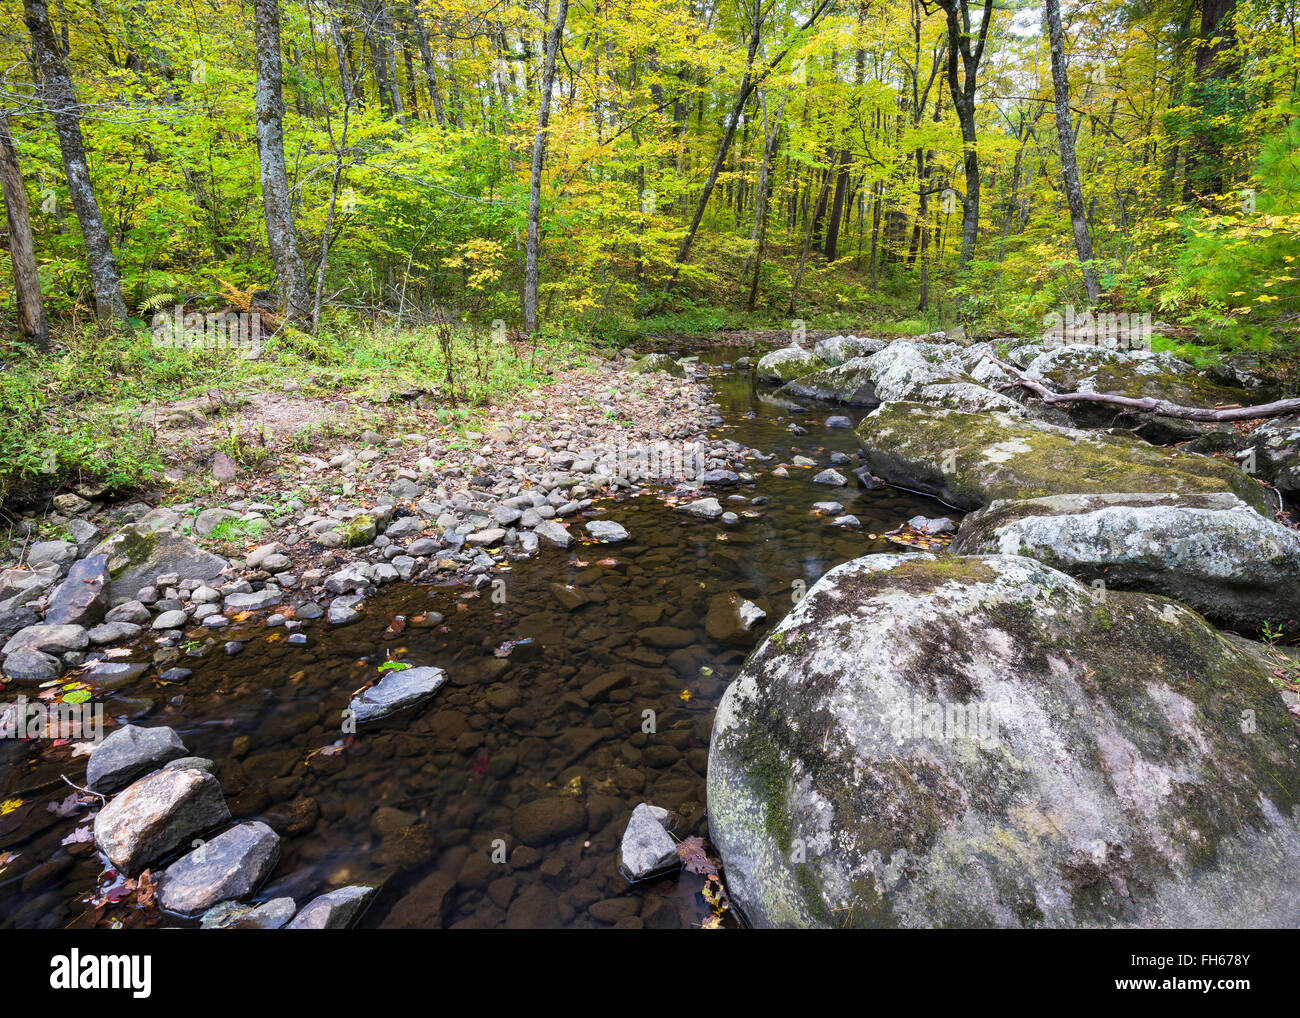 Otter Creek winds its way through the autumn colors of Baxter's Hollow State Natural Area, Wisconsin, USA. Stock Photo